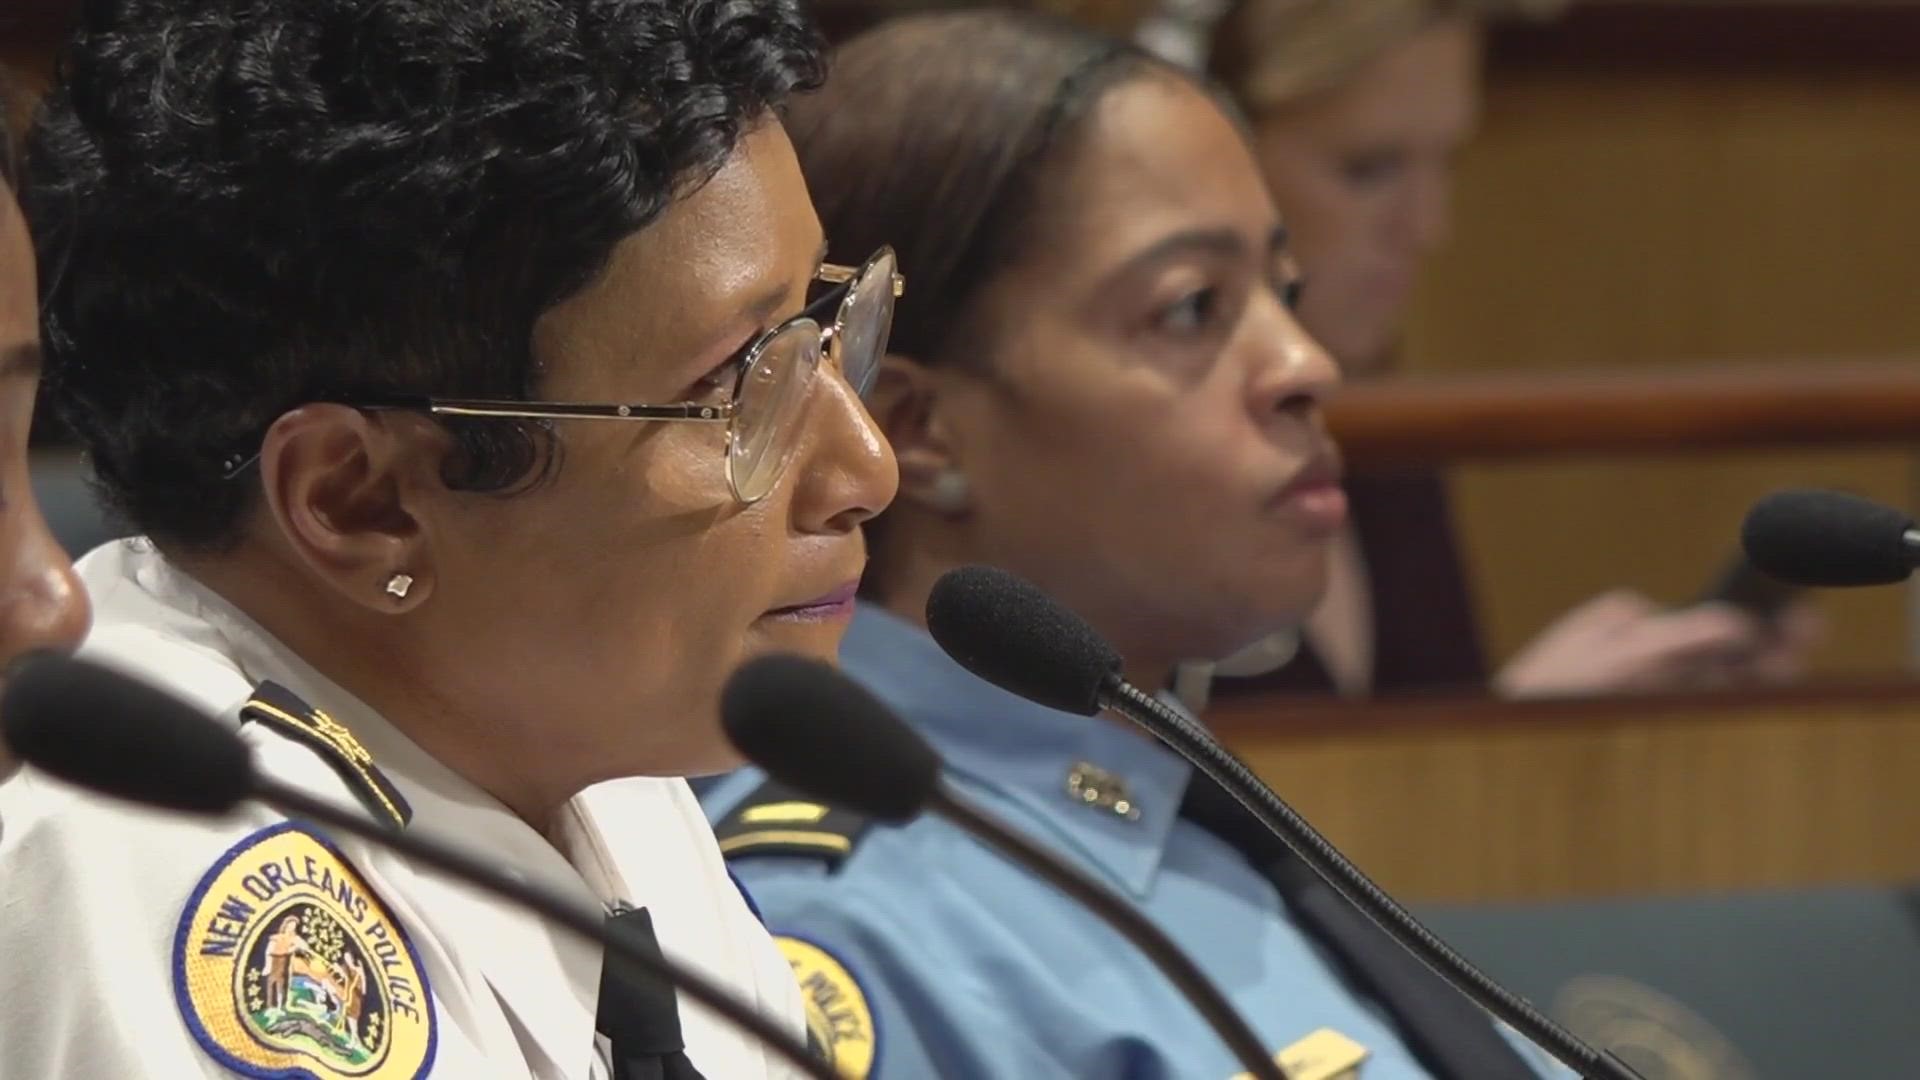 Interim Superintendent Michelle Woodfork told the city council that she believes the city can be made safe with the current level of police staffing.